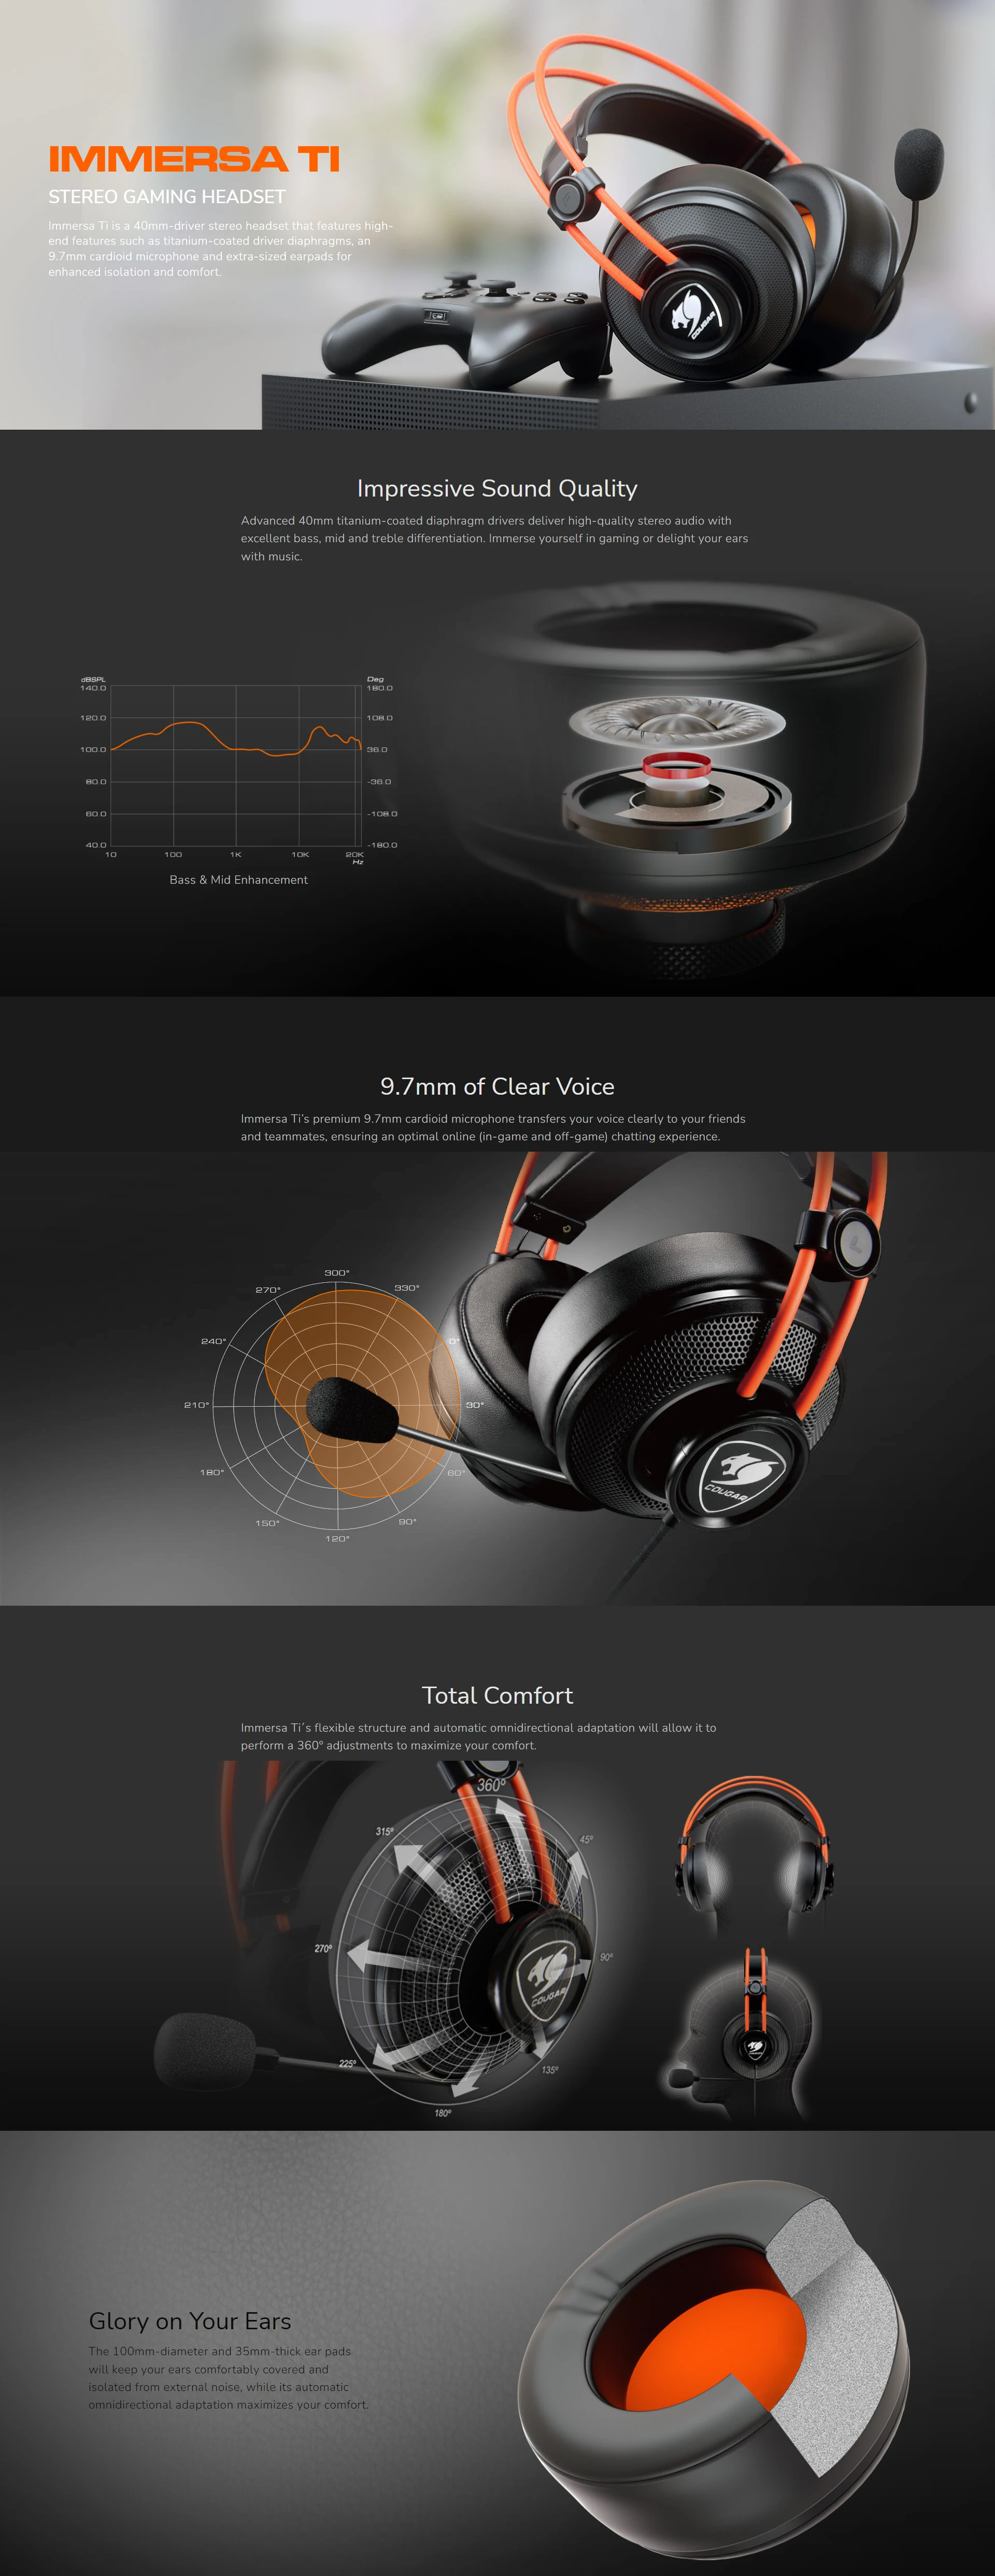 Overview - Cougar - Immersa TI Stereo Gaming Headset